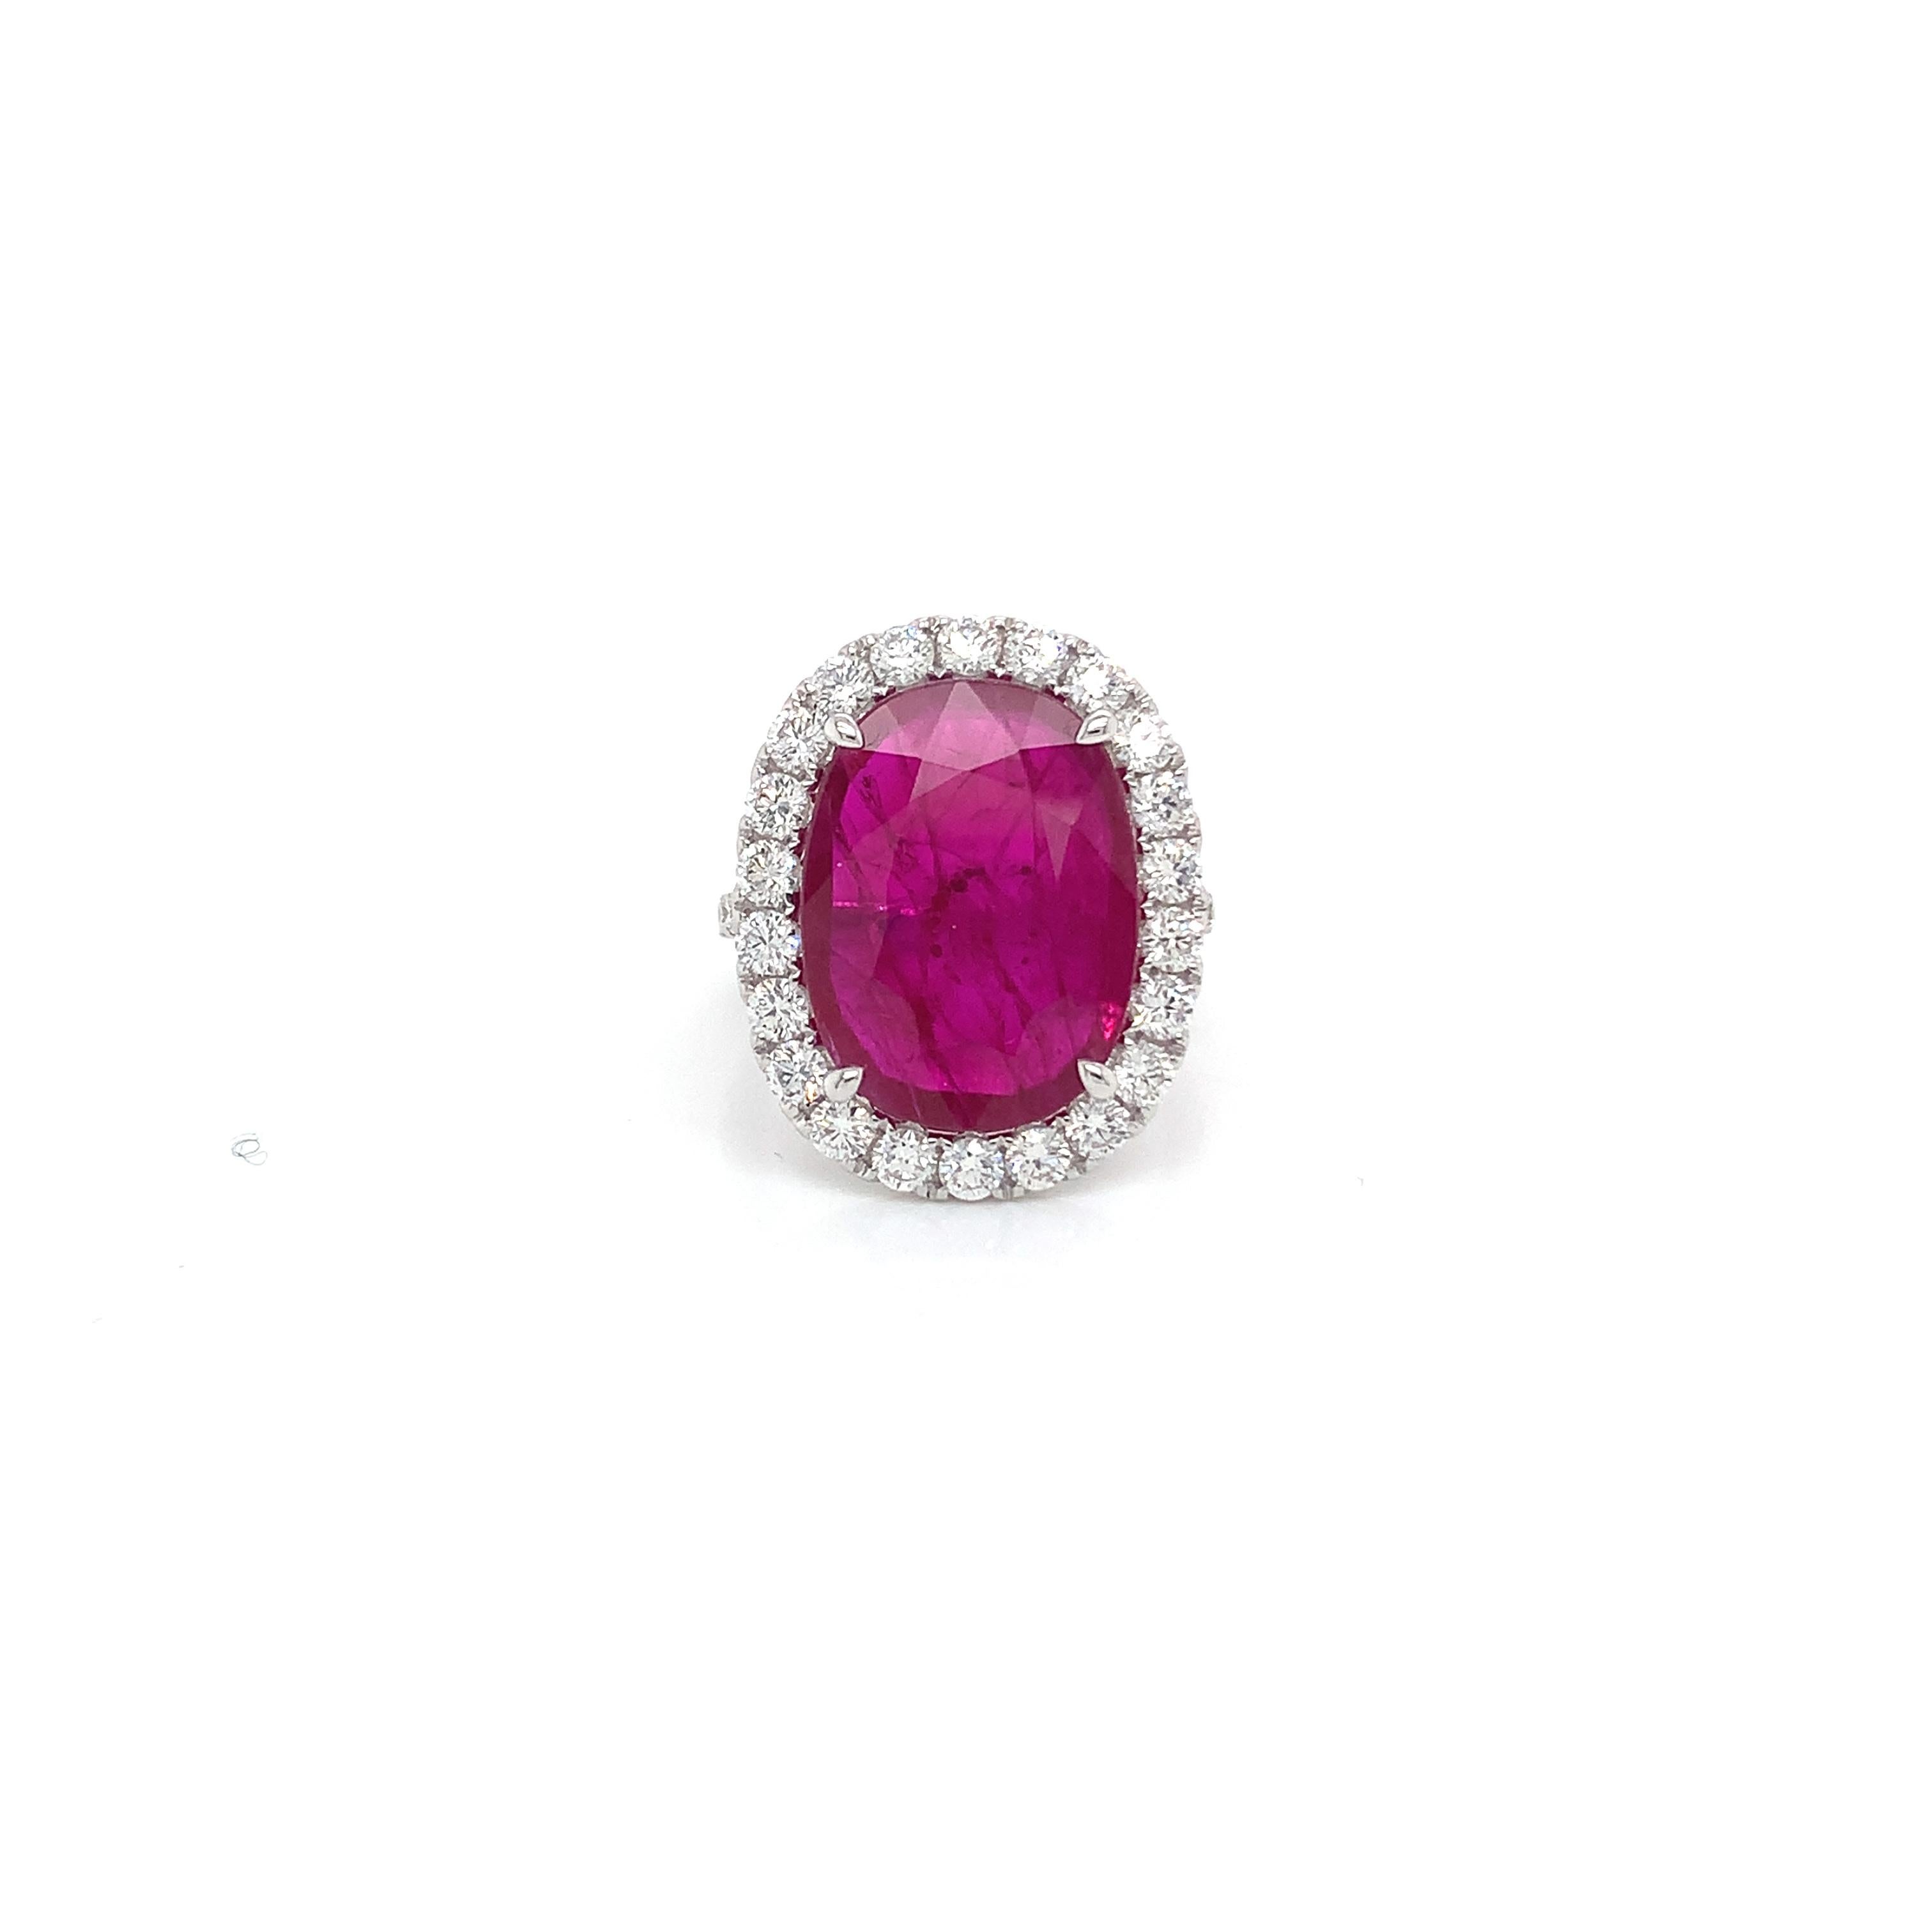 Oval Ruby weighing 6.50 cts
Measuring (16.95x12.70x2.40) mm
34 round diamonds weighing 1.44 cts
Set in 18k white gold ring